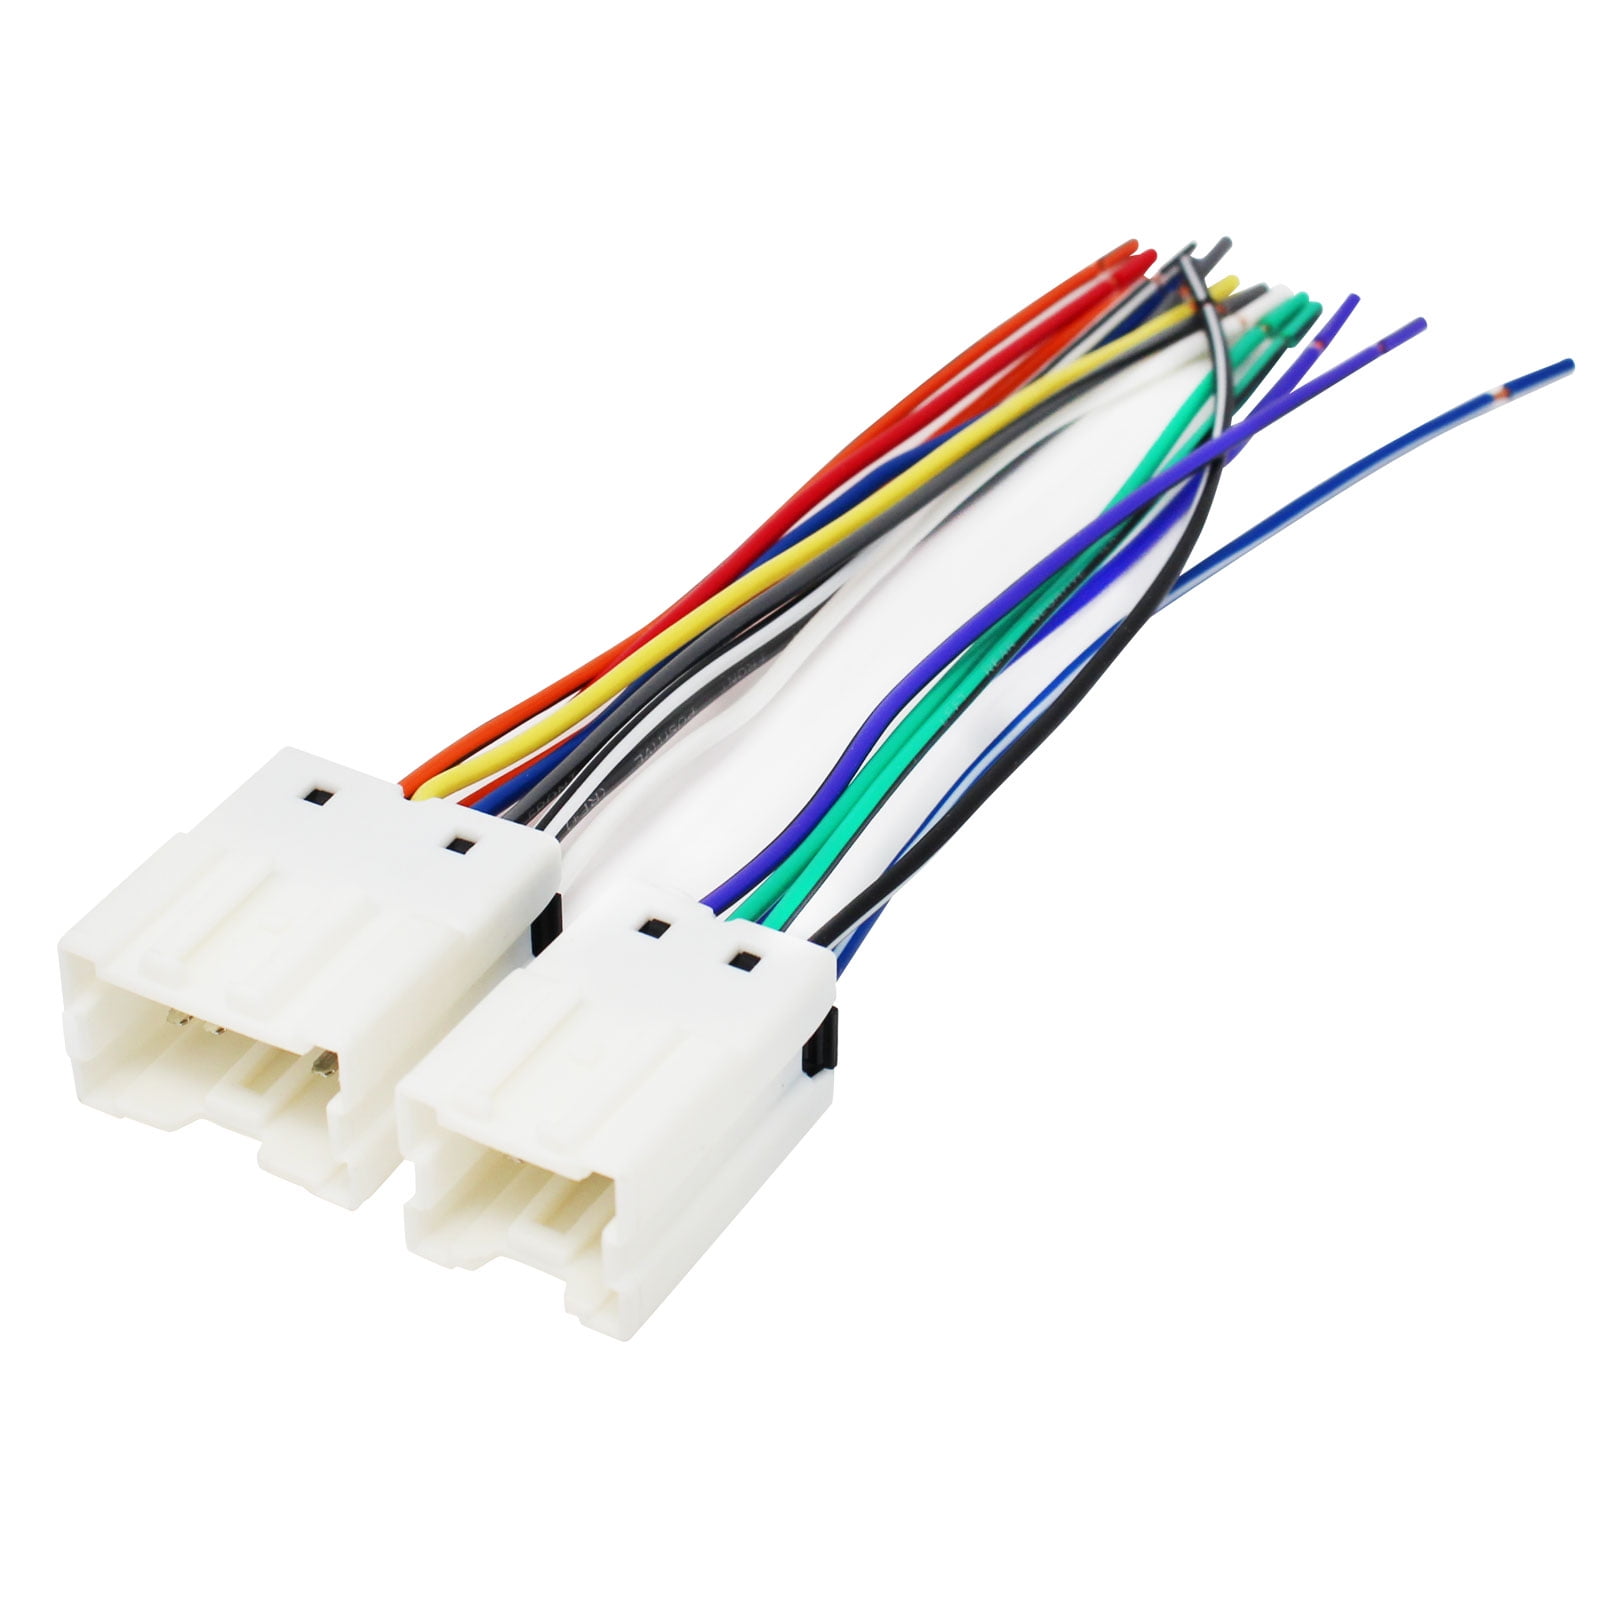 Nissan Xterra Stereo Wiring Harness from i5.walmartimages.com